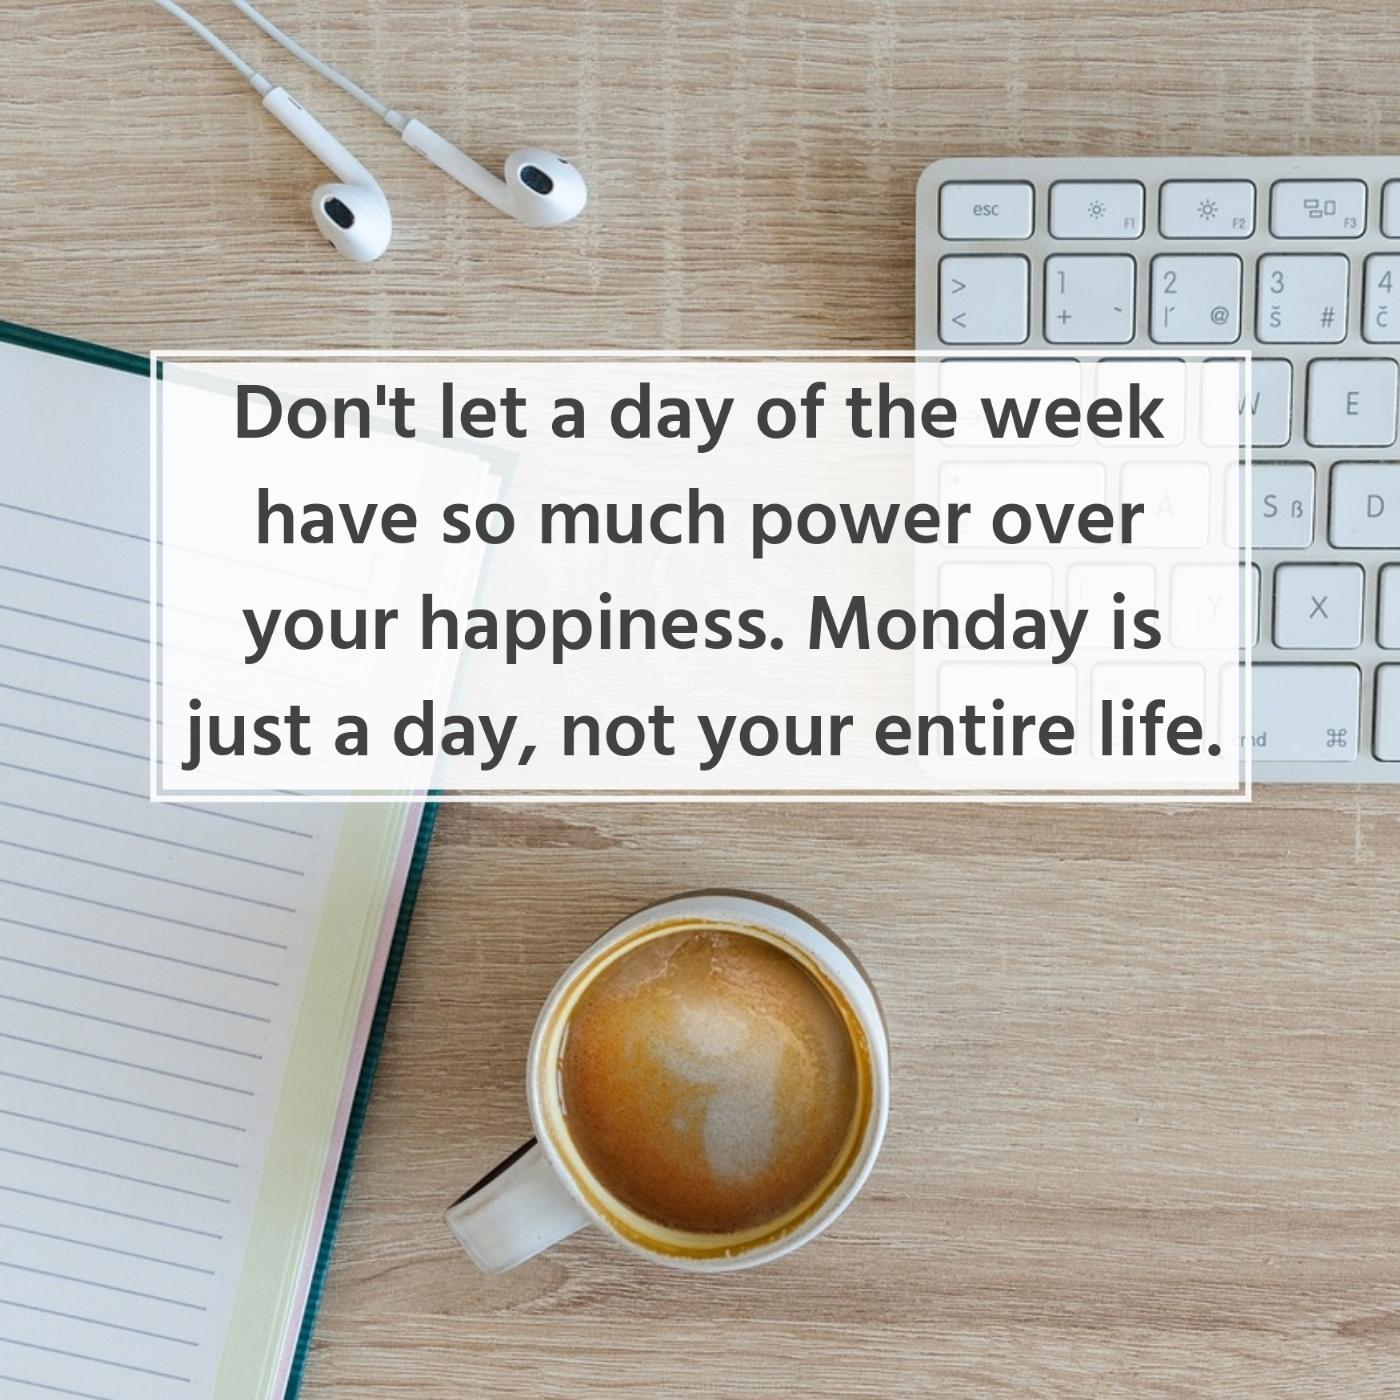 Don't let a day of the week have so much power